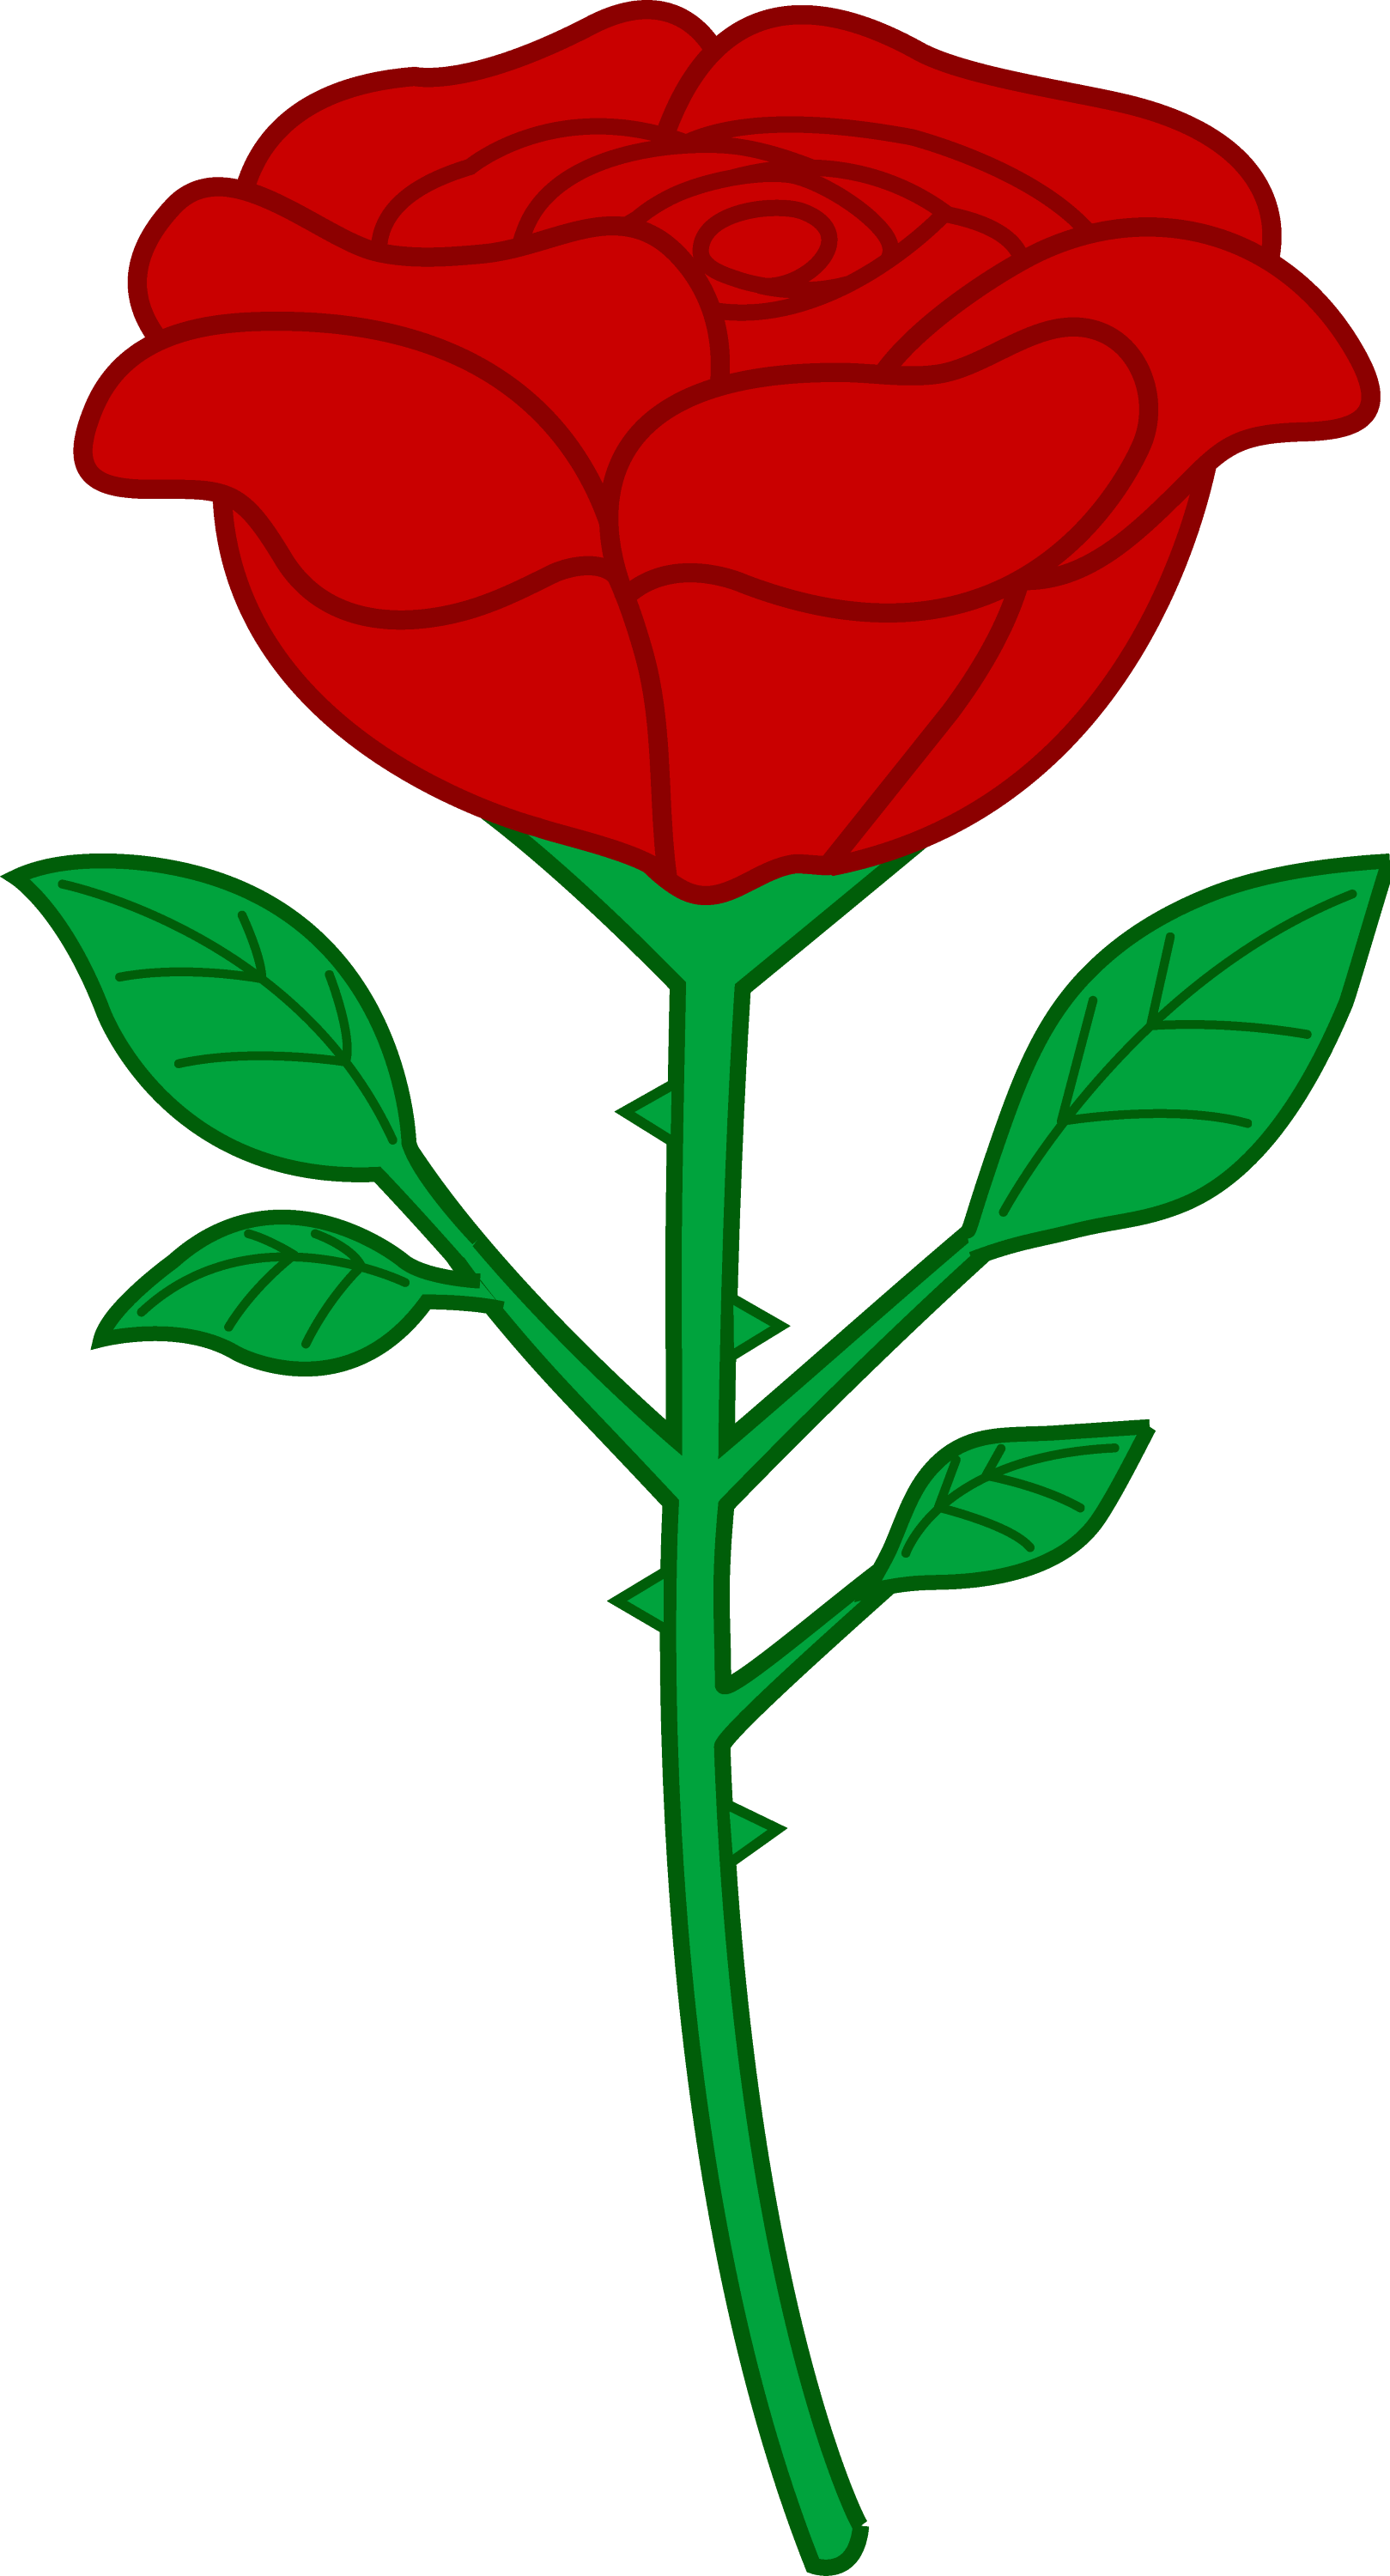 clipart of rose plant - photo #21